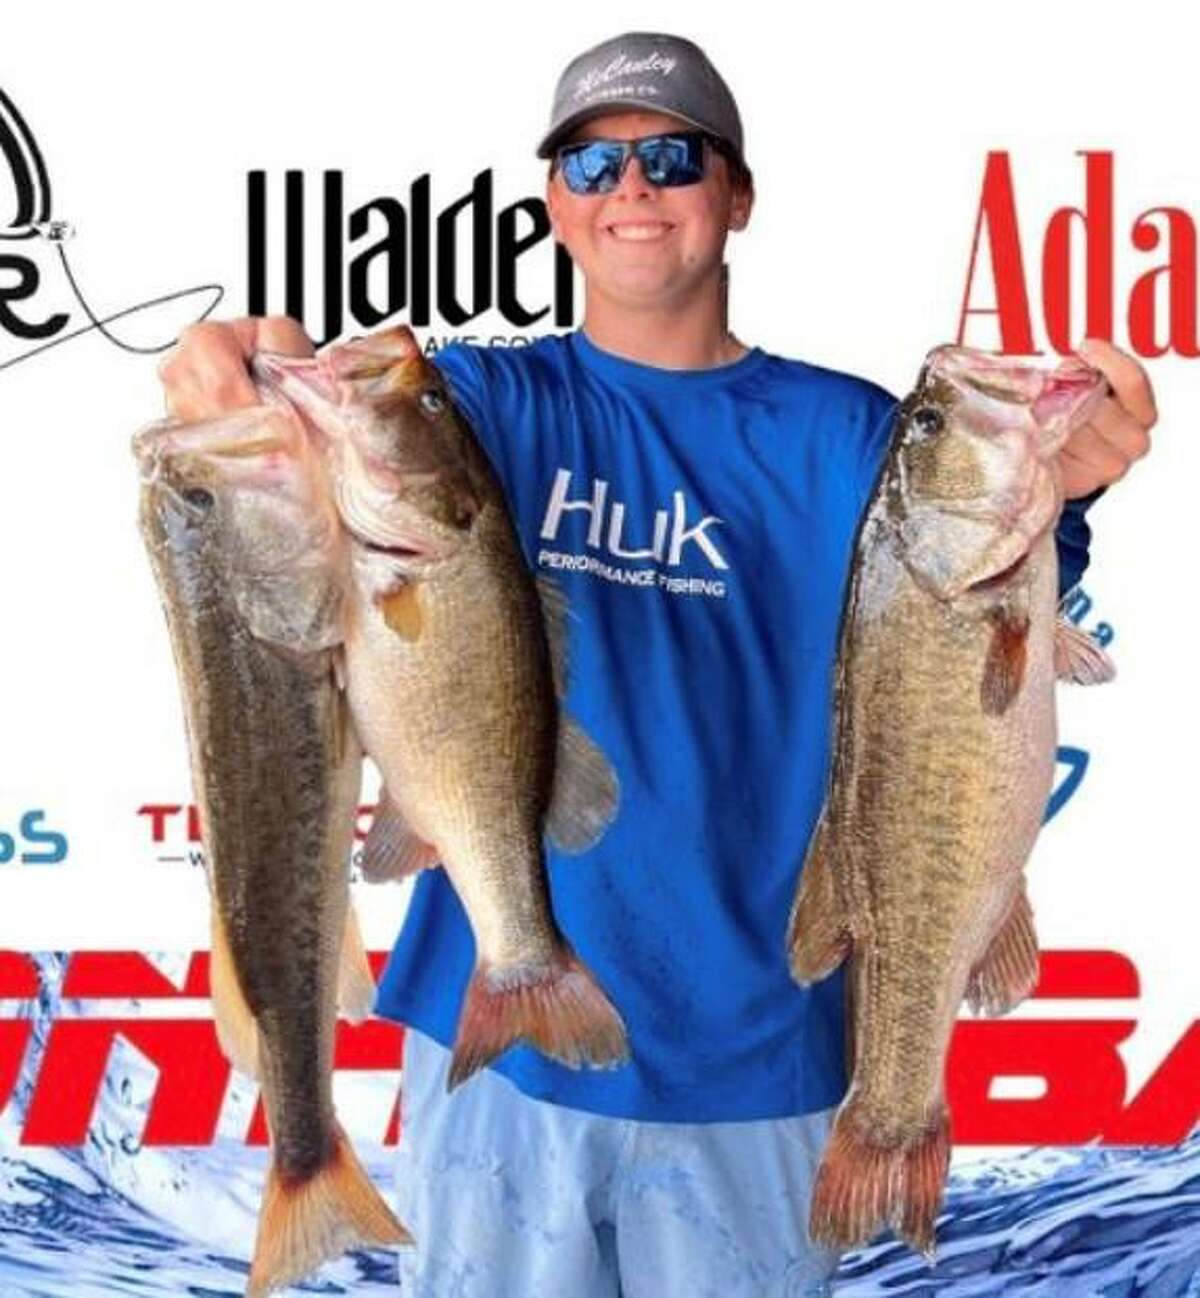 Curtis McCauley came in second place in the CONROEBASS Thursday Big Bass Individual Championship with a stringer weight of 13.76 pounds.